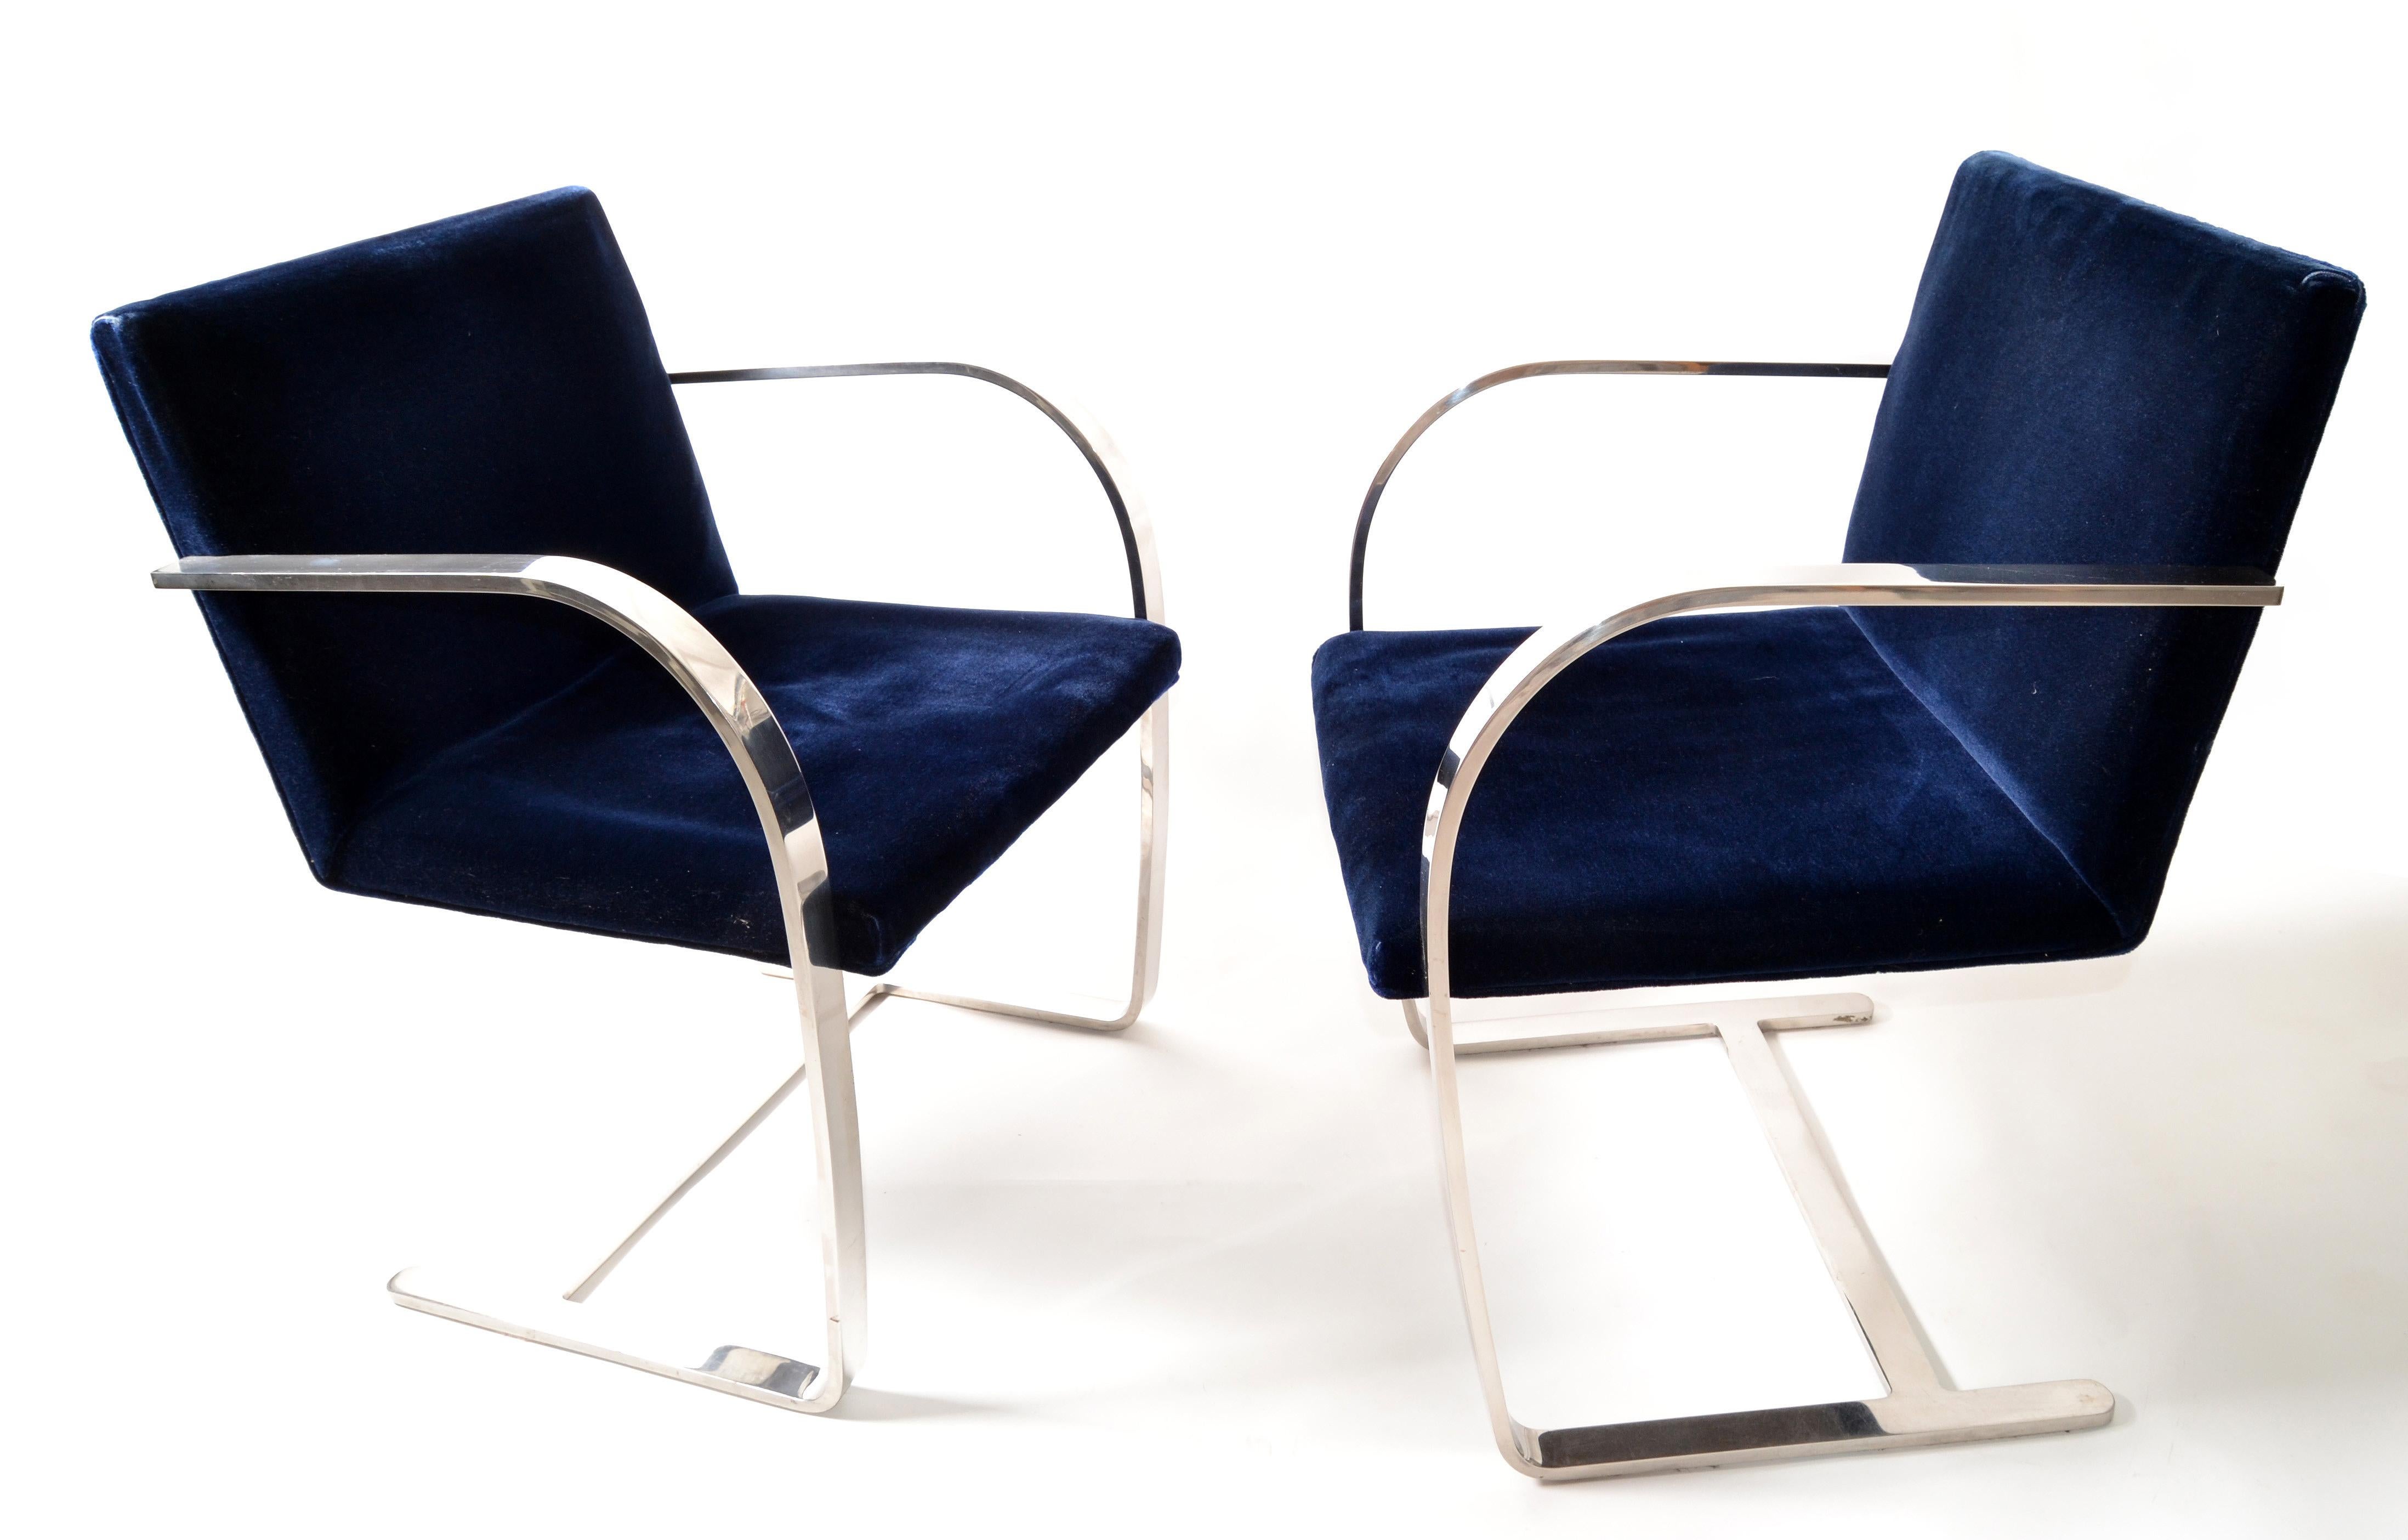 Mies Van Der Rohe For Knoll Stainless Steel Brno Chairs Blue Velvet 1977, Pair   In Good Condition For Sale In Miami, FL